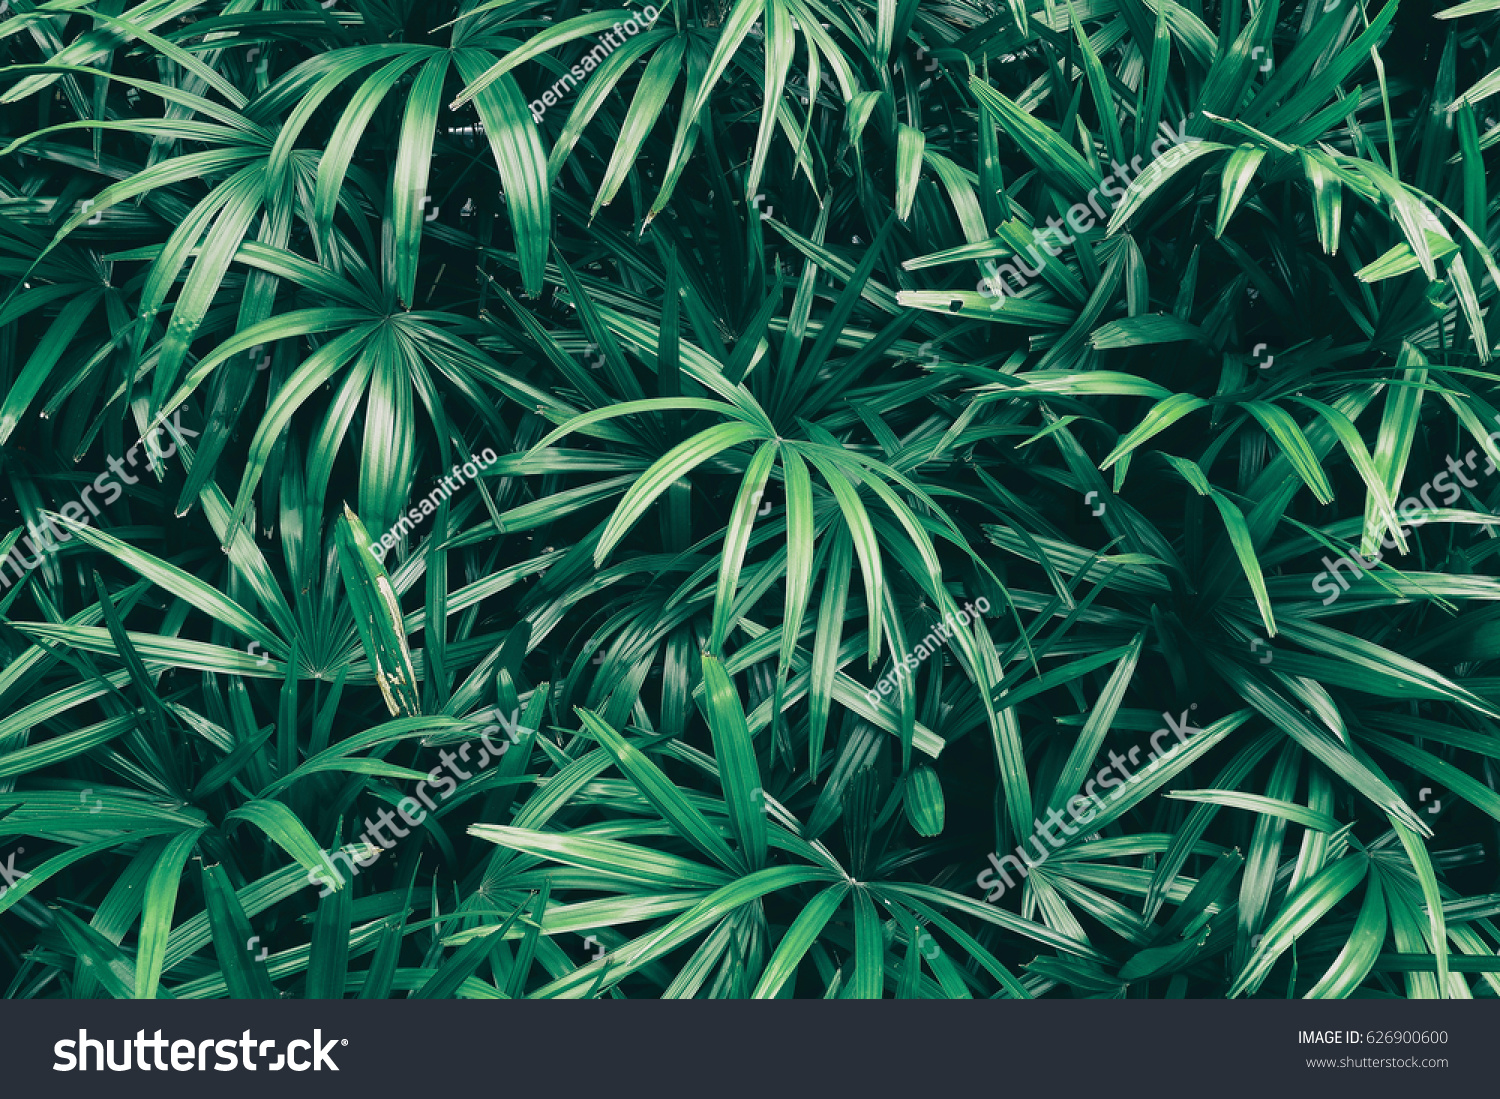 tropical leaf texture background, dark green foliage are shaped like tiny spikes #626900600